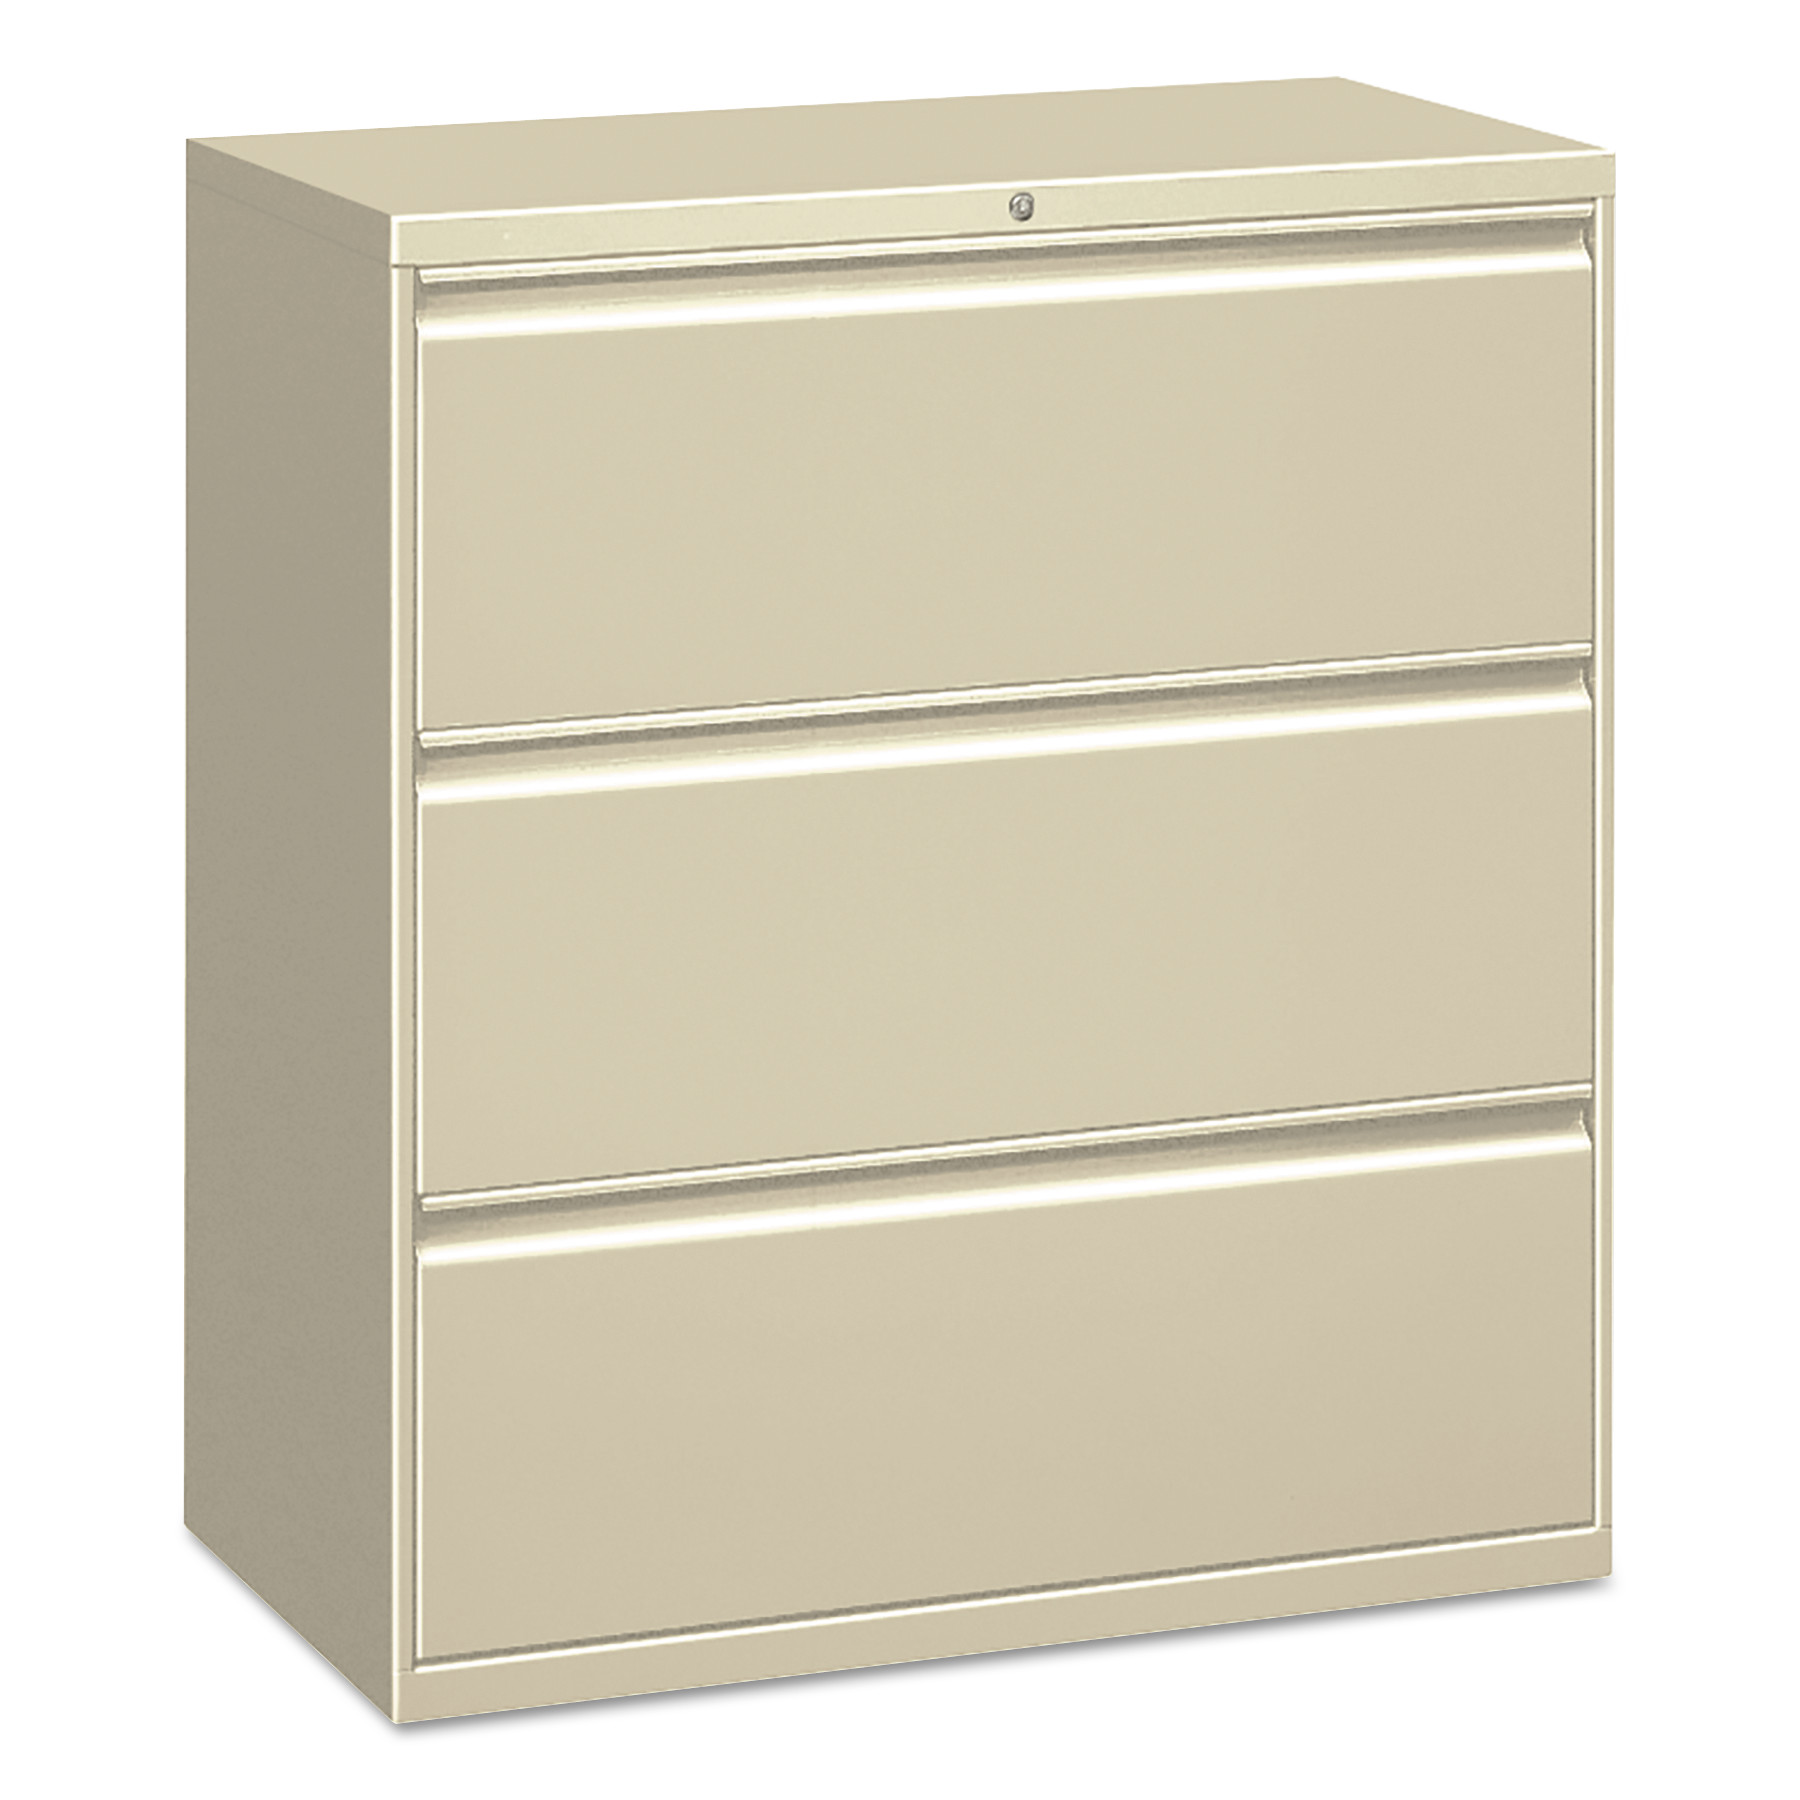 Three-Drawer Lateral File Cabinet, 30w x 18d x 39 1/2h, Putty